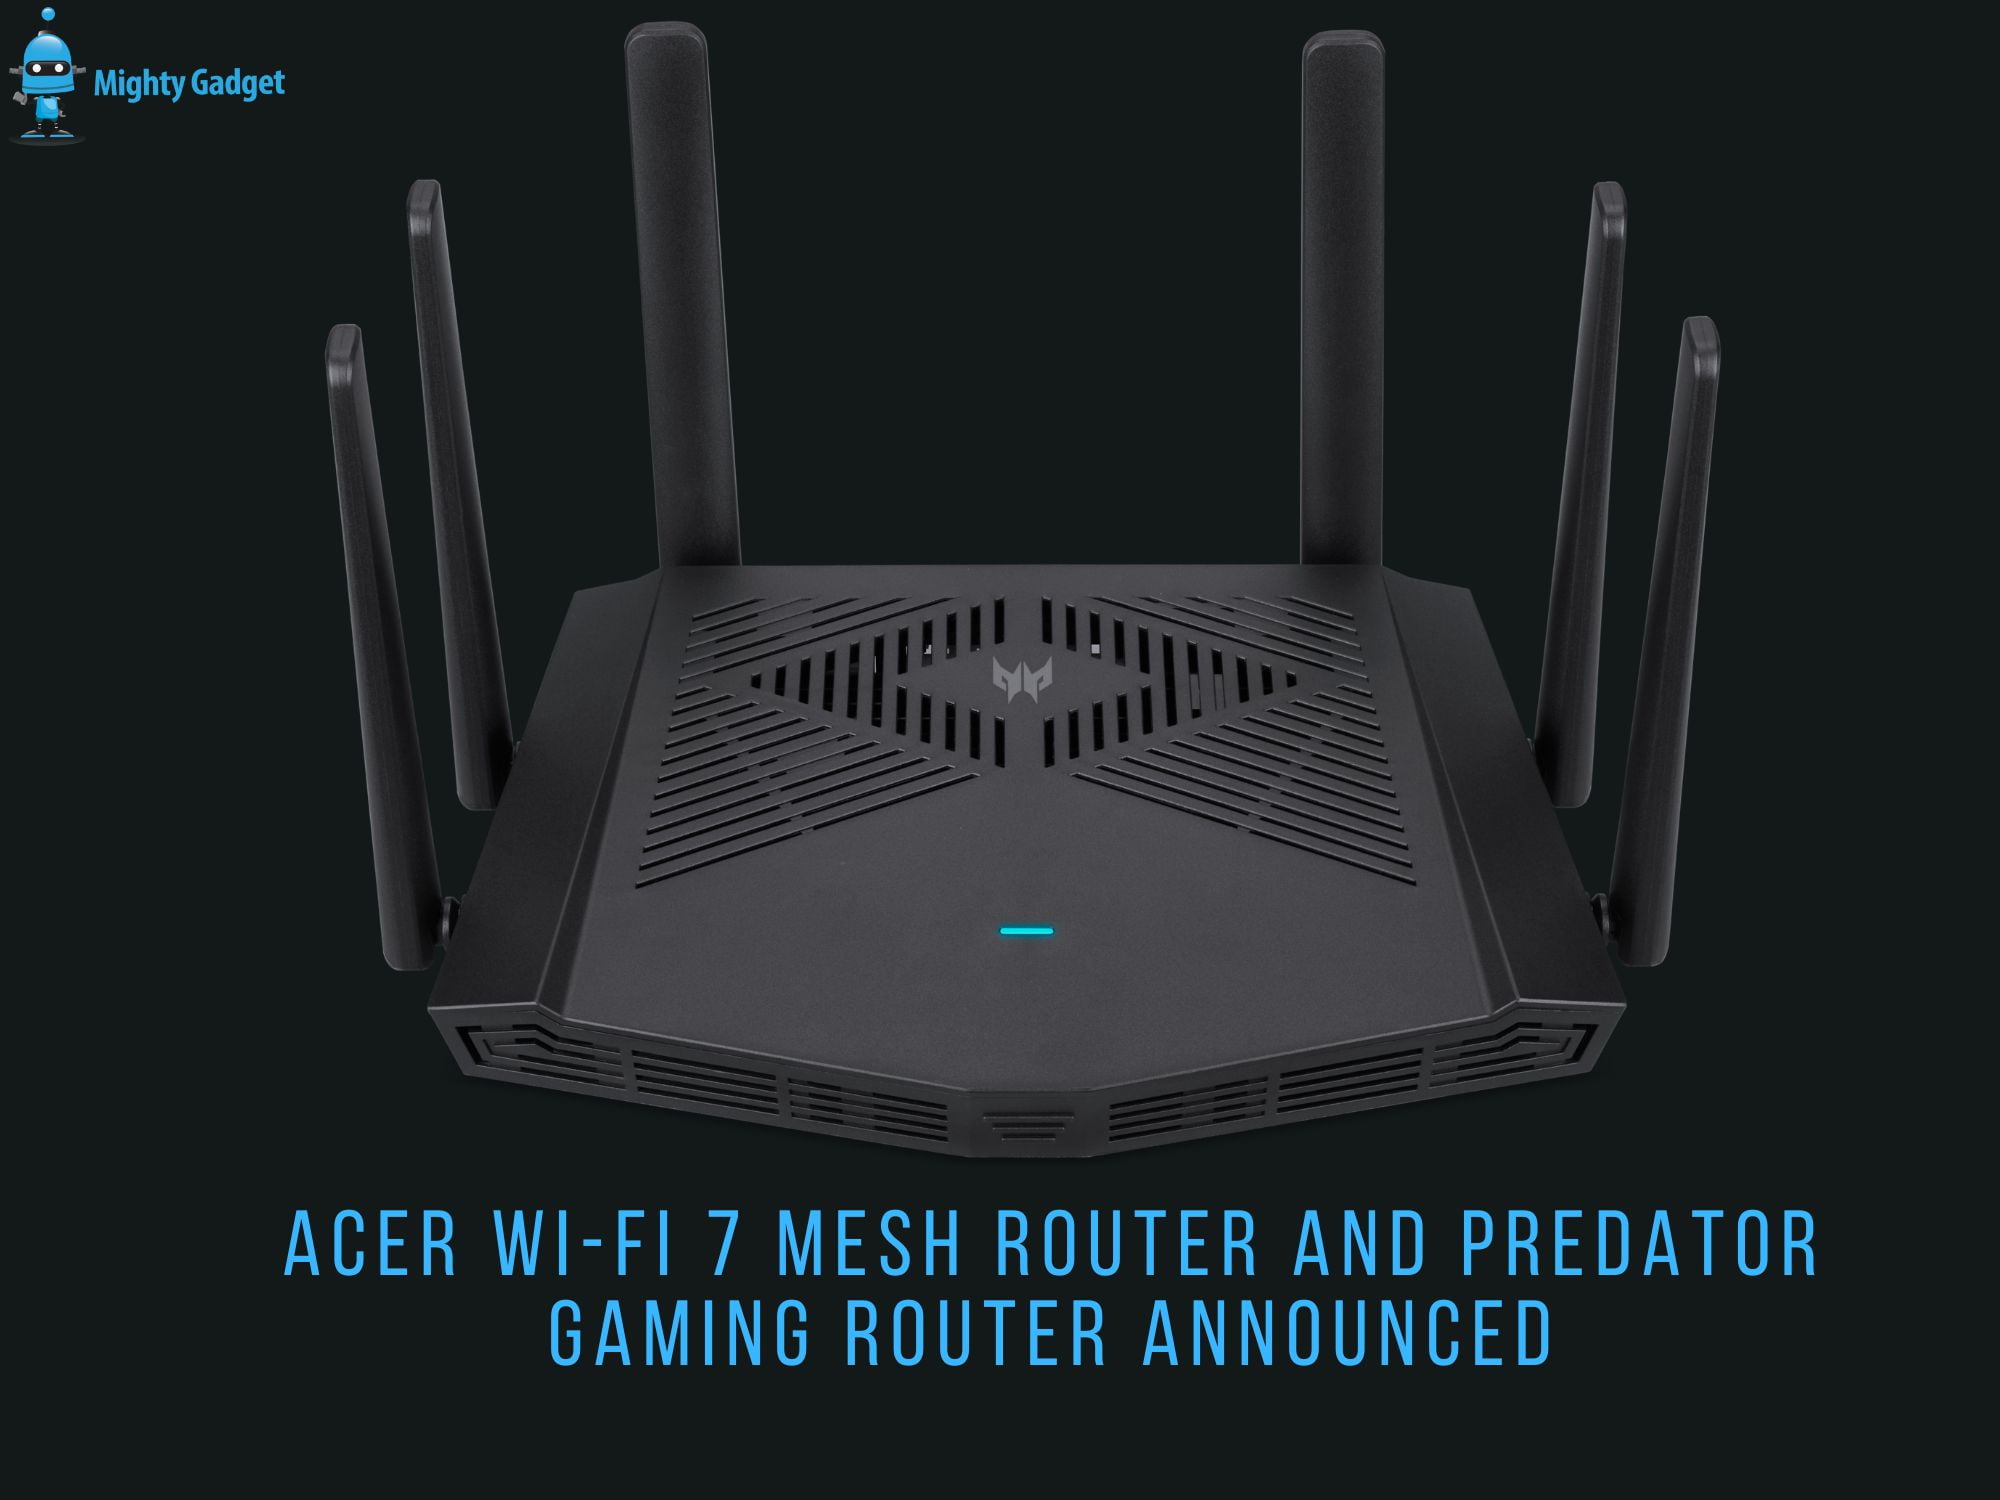 Acer Wi Fi 7 Mesh Router and Predator Gaming Router Announced